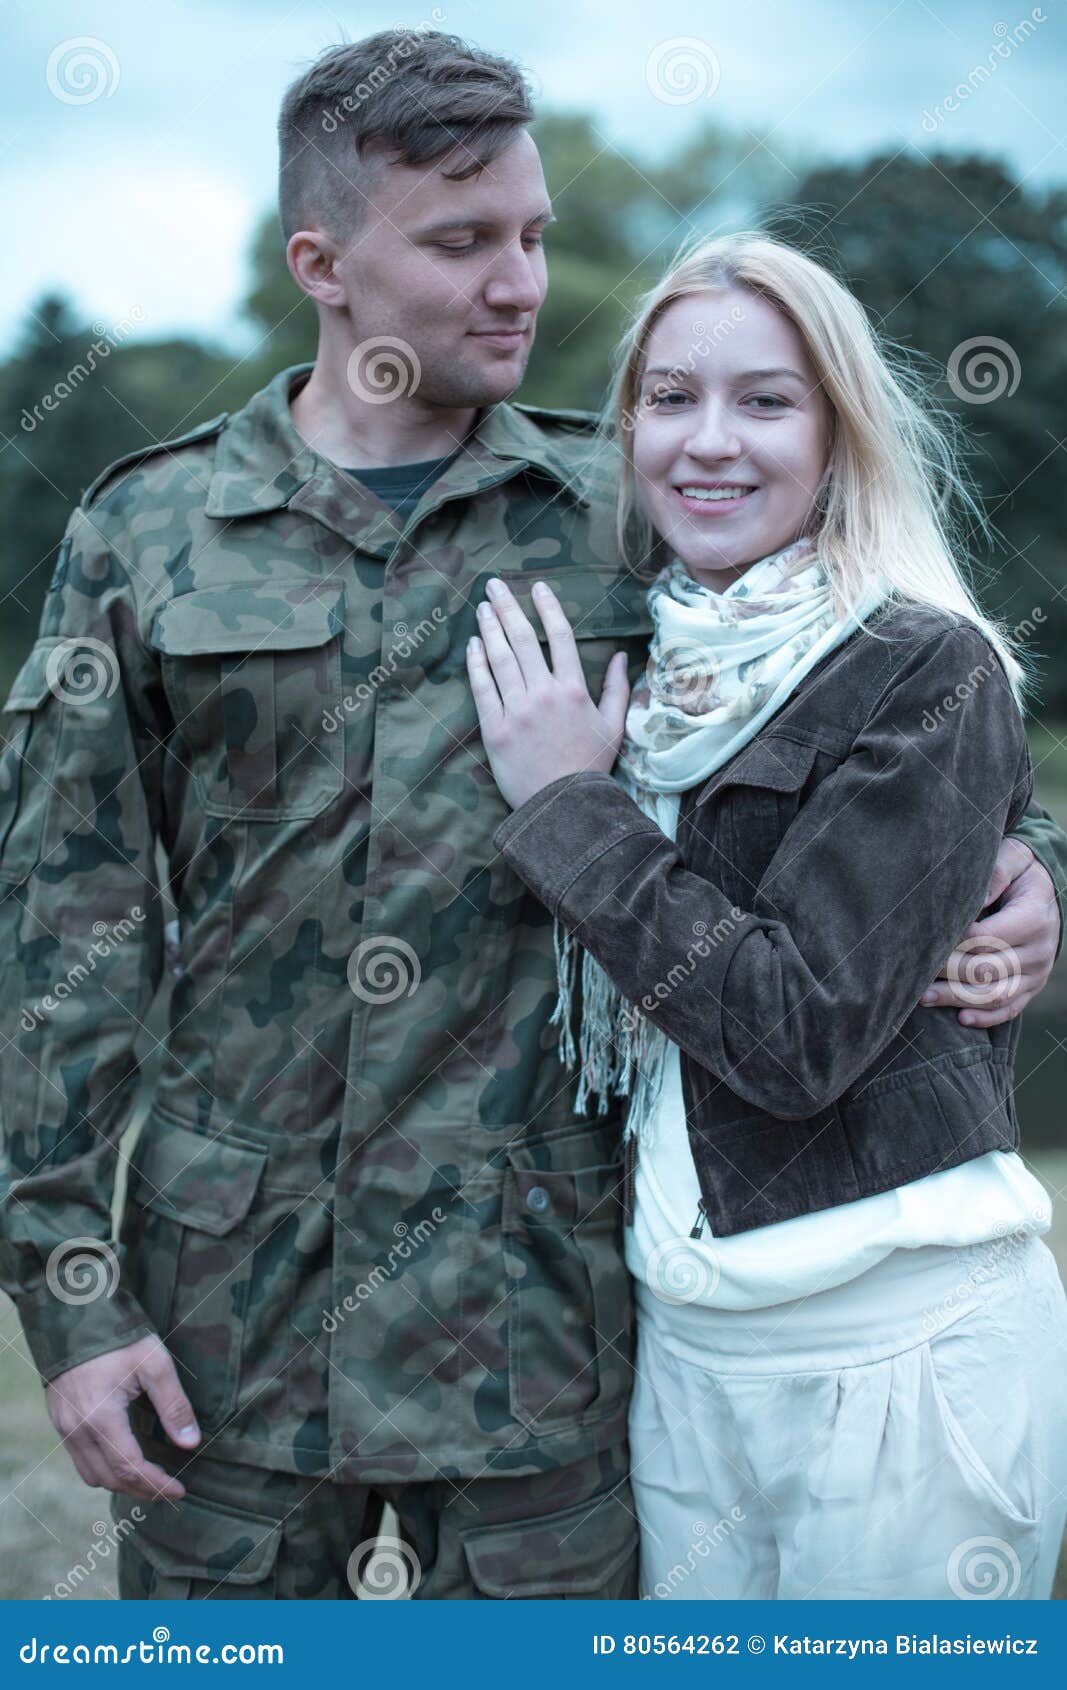 wifey welcoming home young soldier